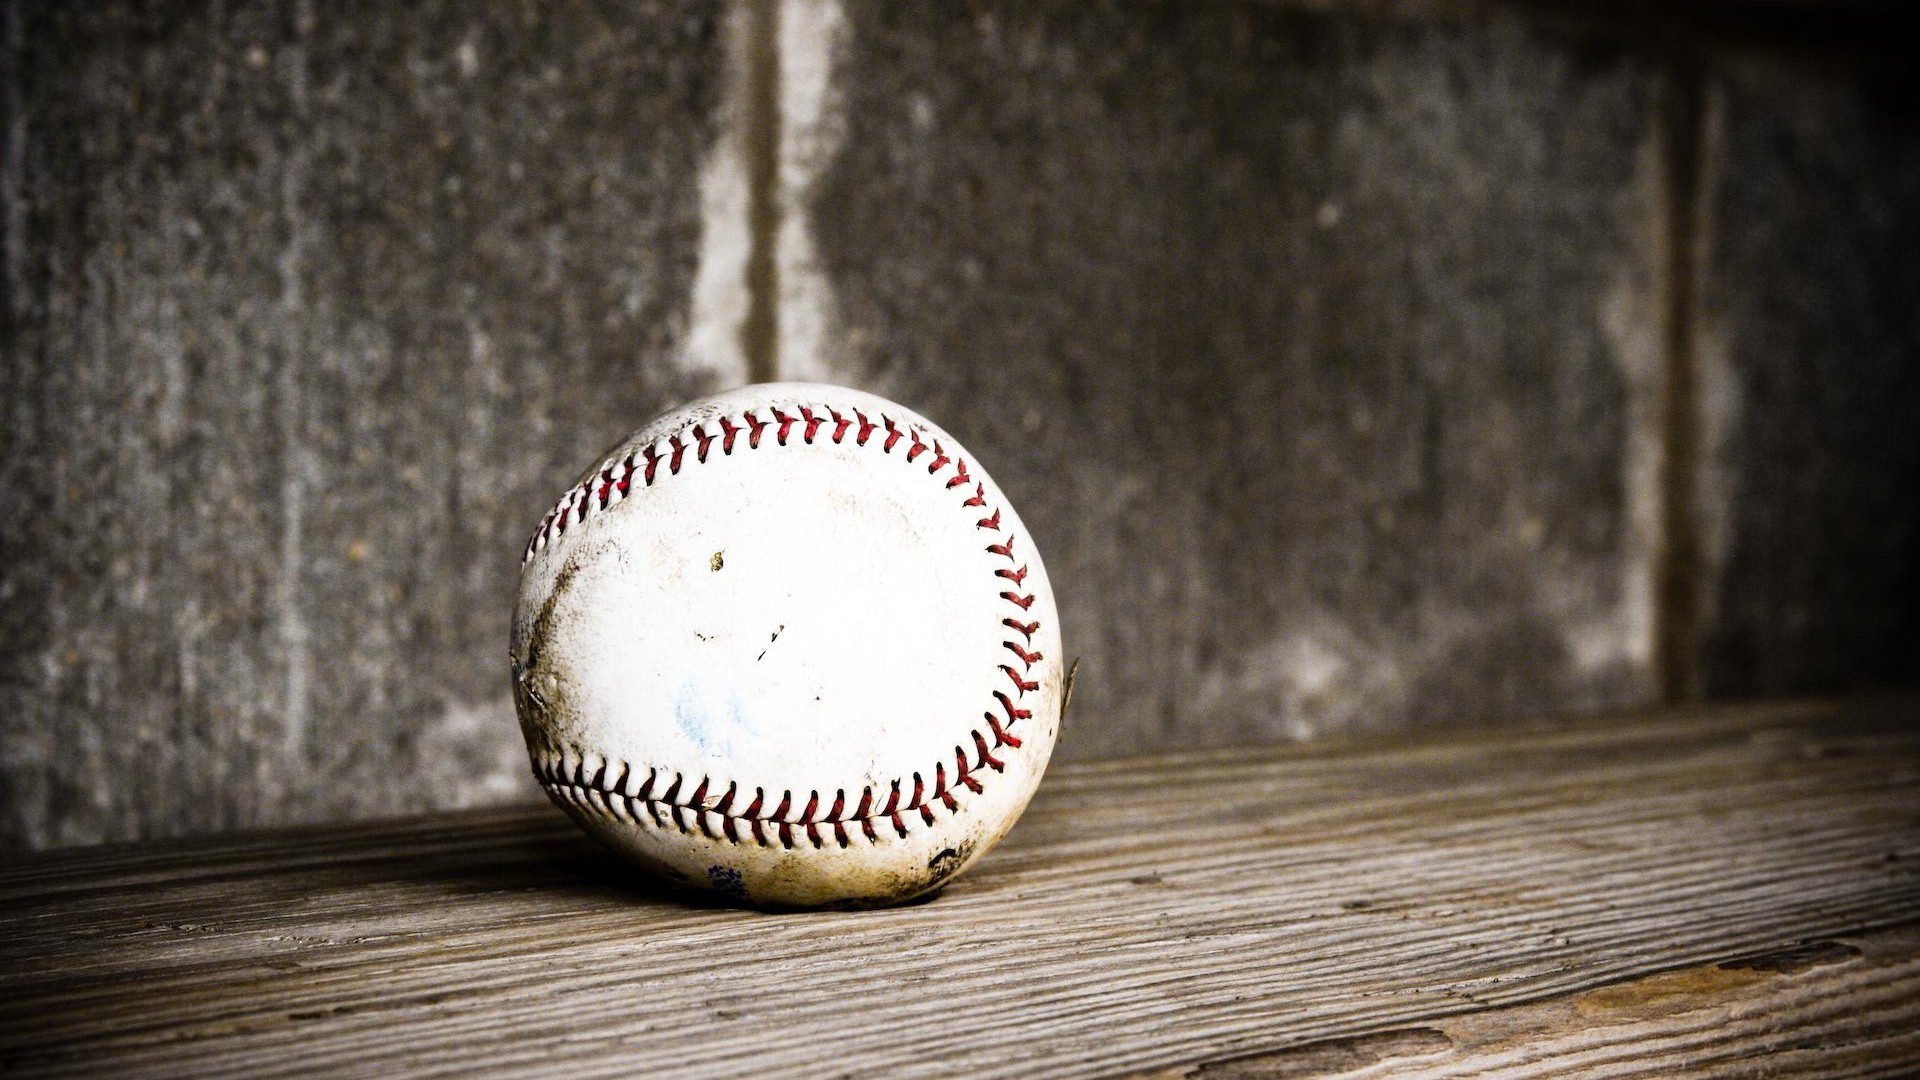 1920x1080 For Your Desktop Baseball Wallpapers 37 Top Quality 